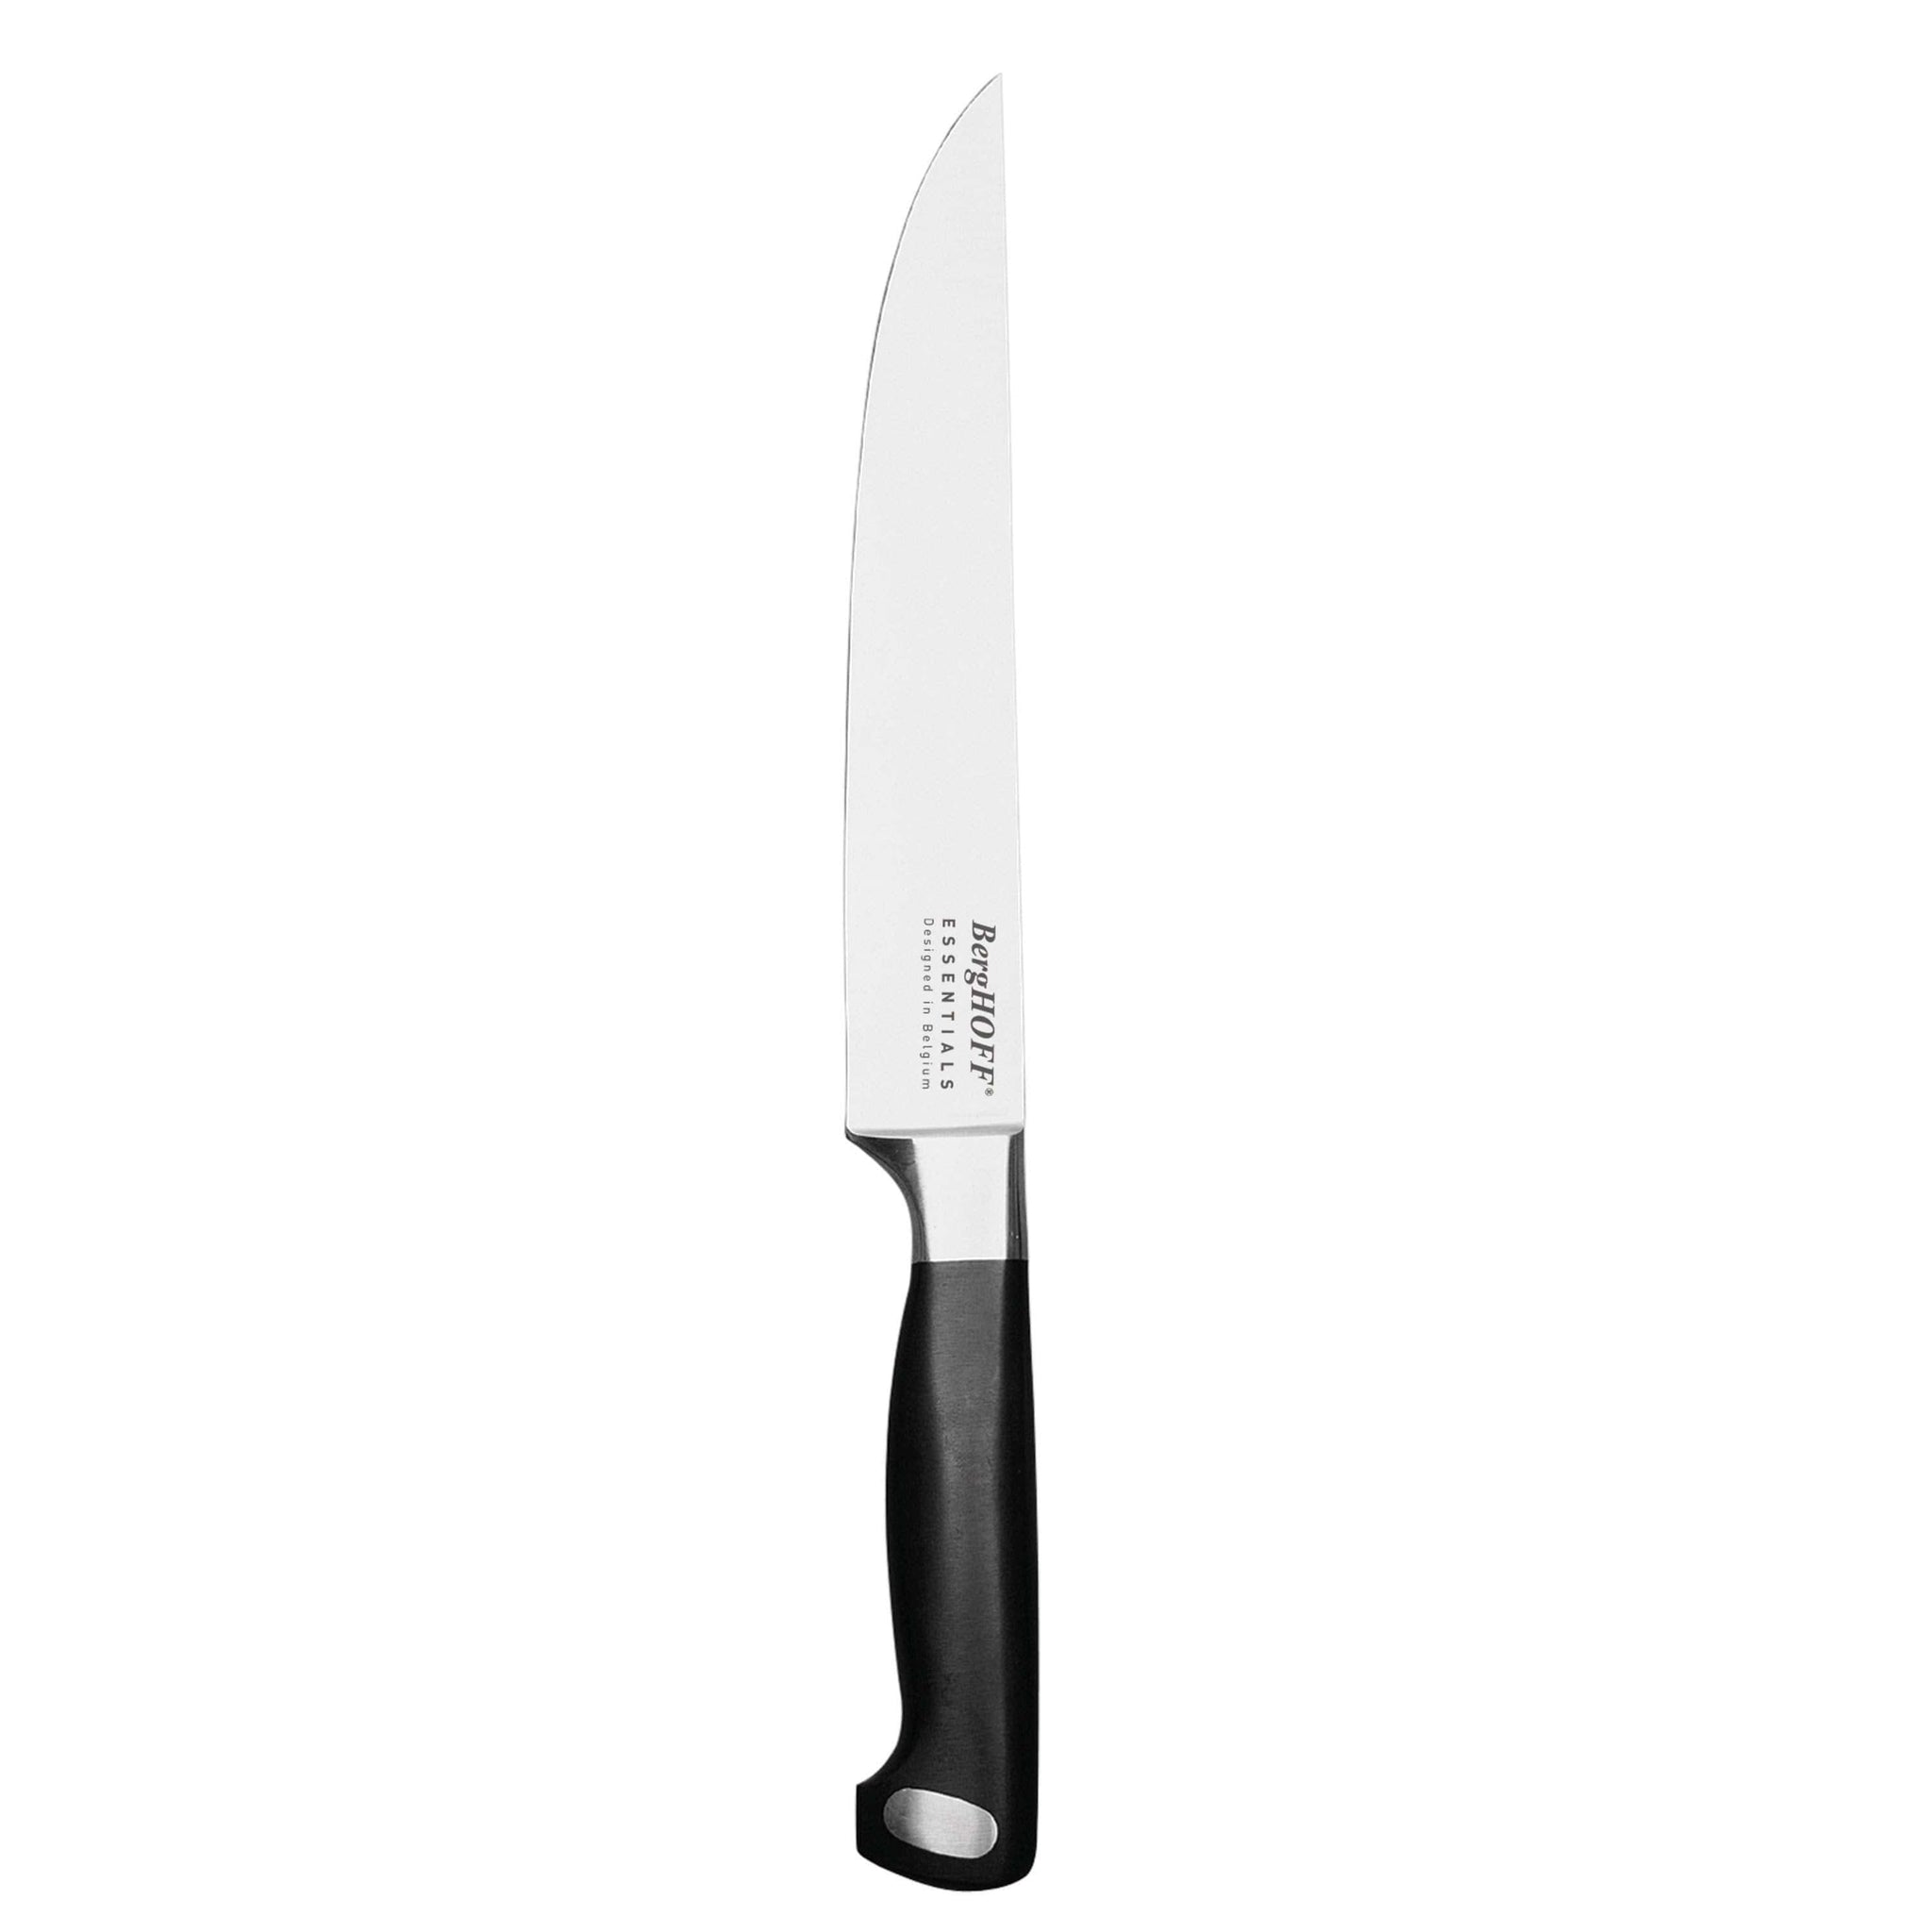 BergHOFF - Essentials Utility Knife Flexible with POM Handle  - Stainless Steel - 26cm - 6600072